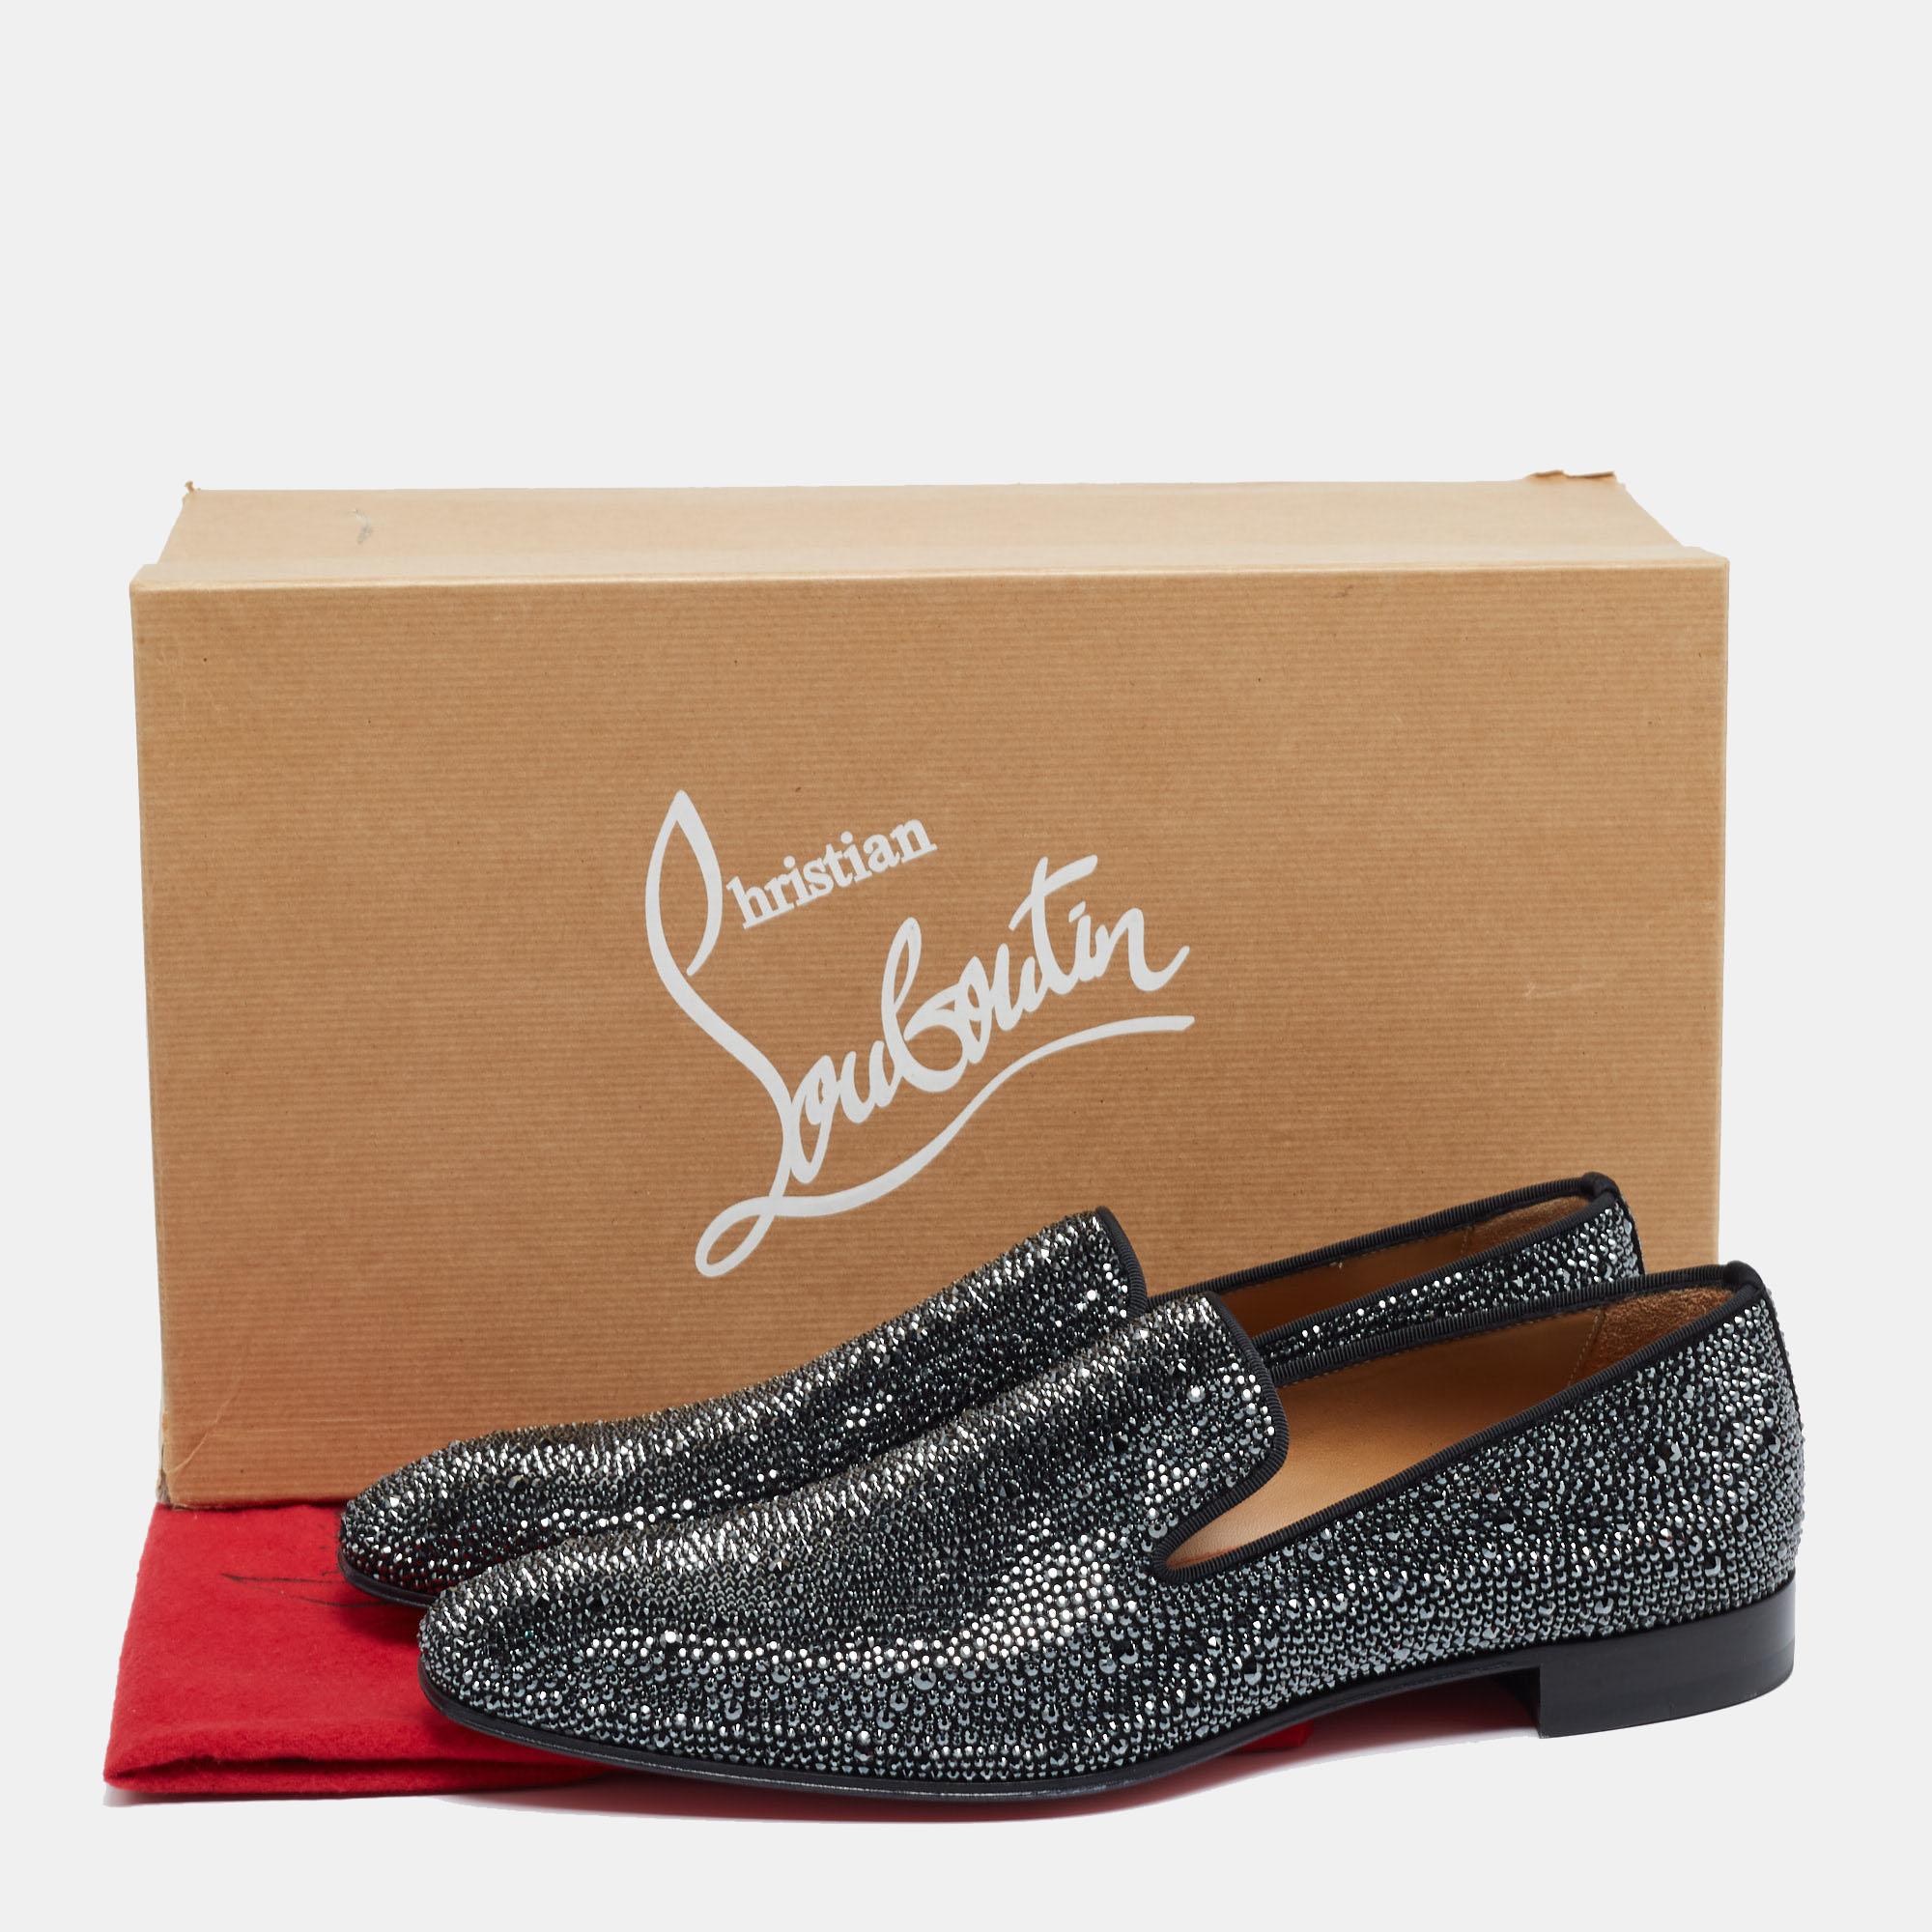 Christian Louboutin Black Suede Dandelion Strass Smoking Slippers Size 41.5 4